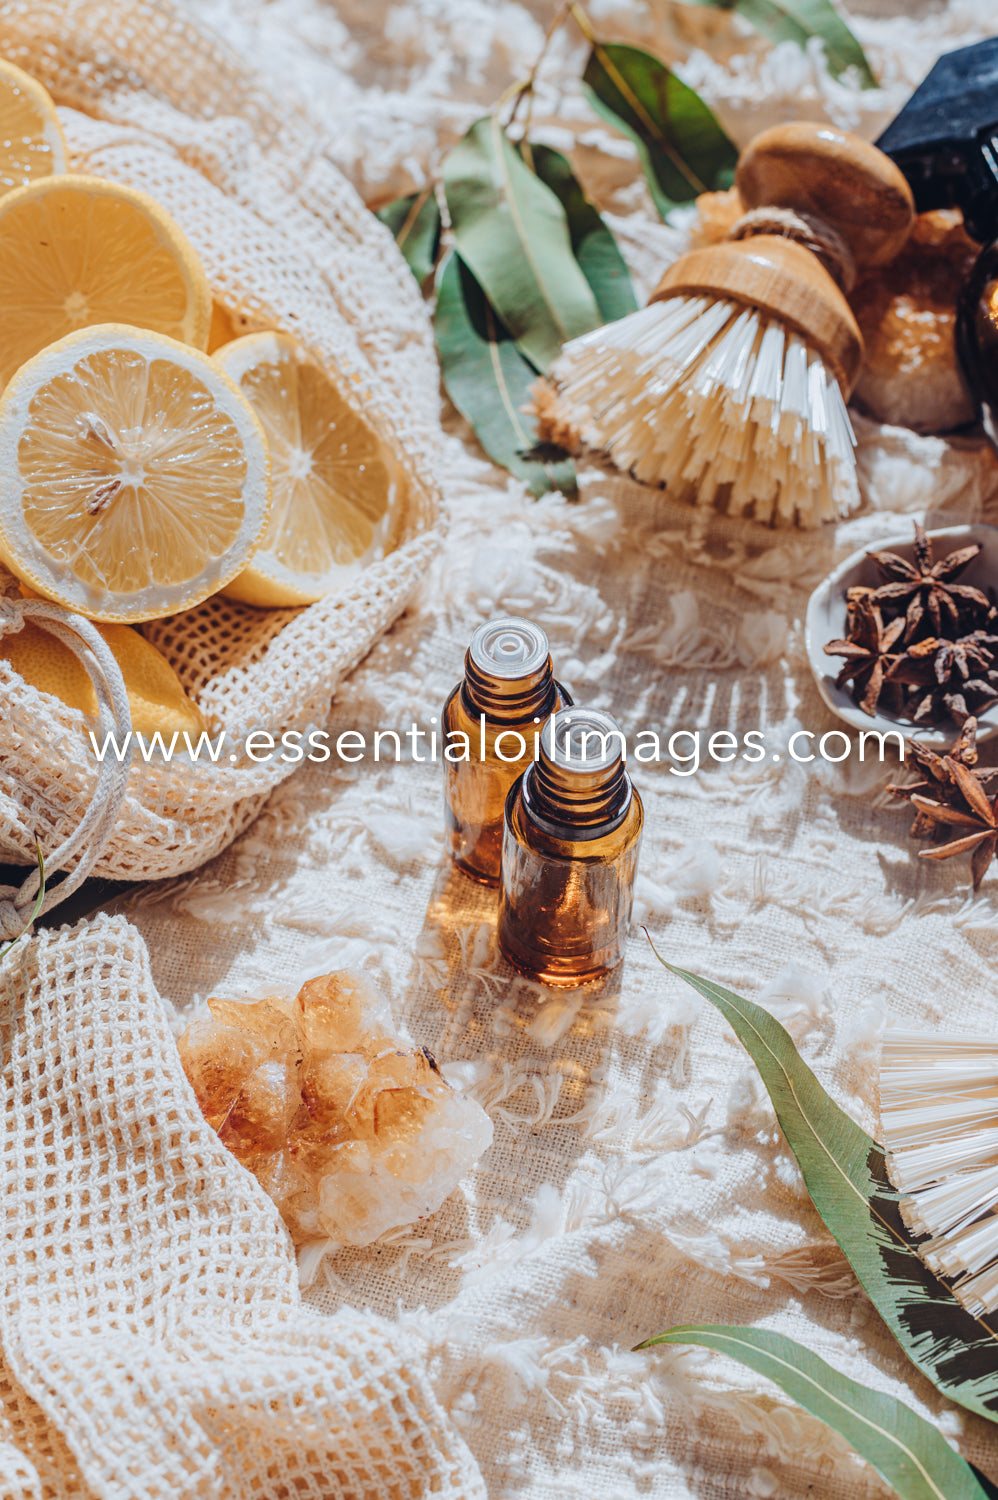 The Essential Oil Images Luxe Green Cleaning Images Collection